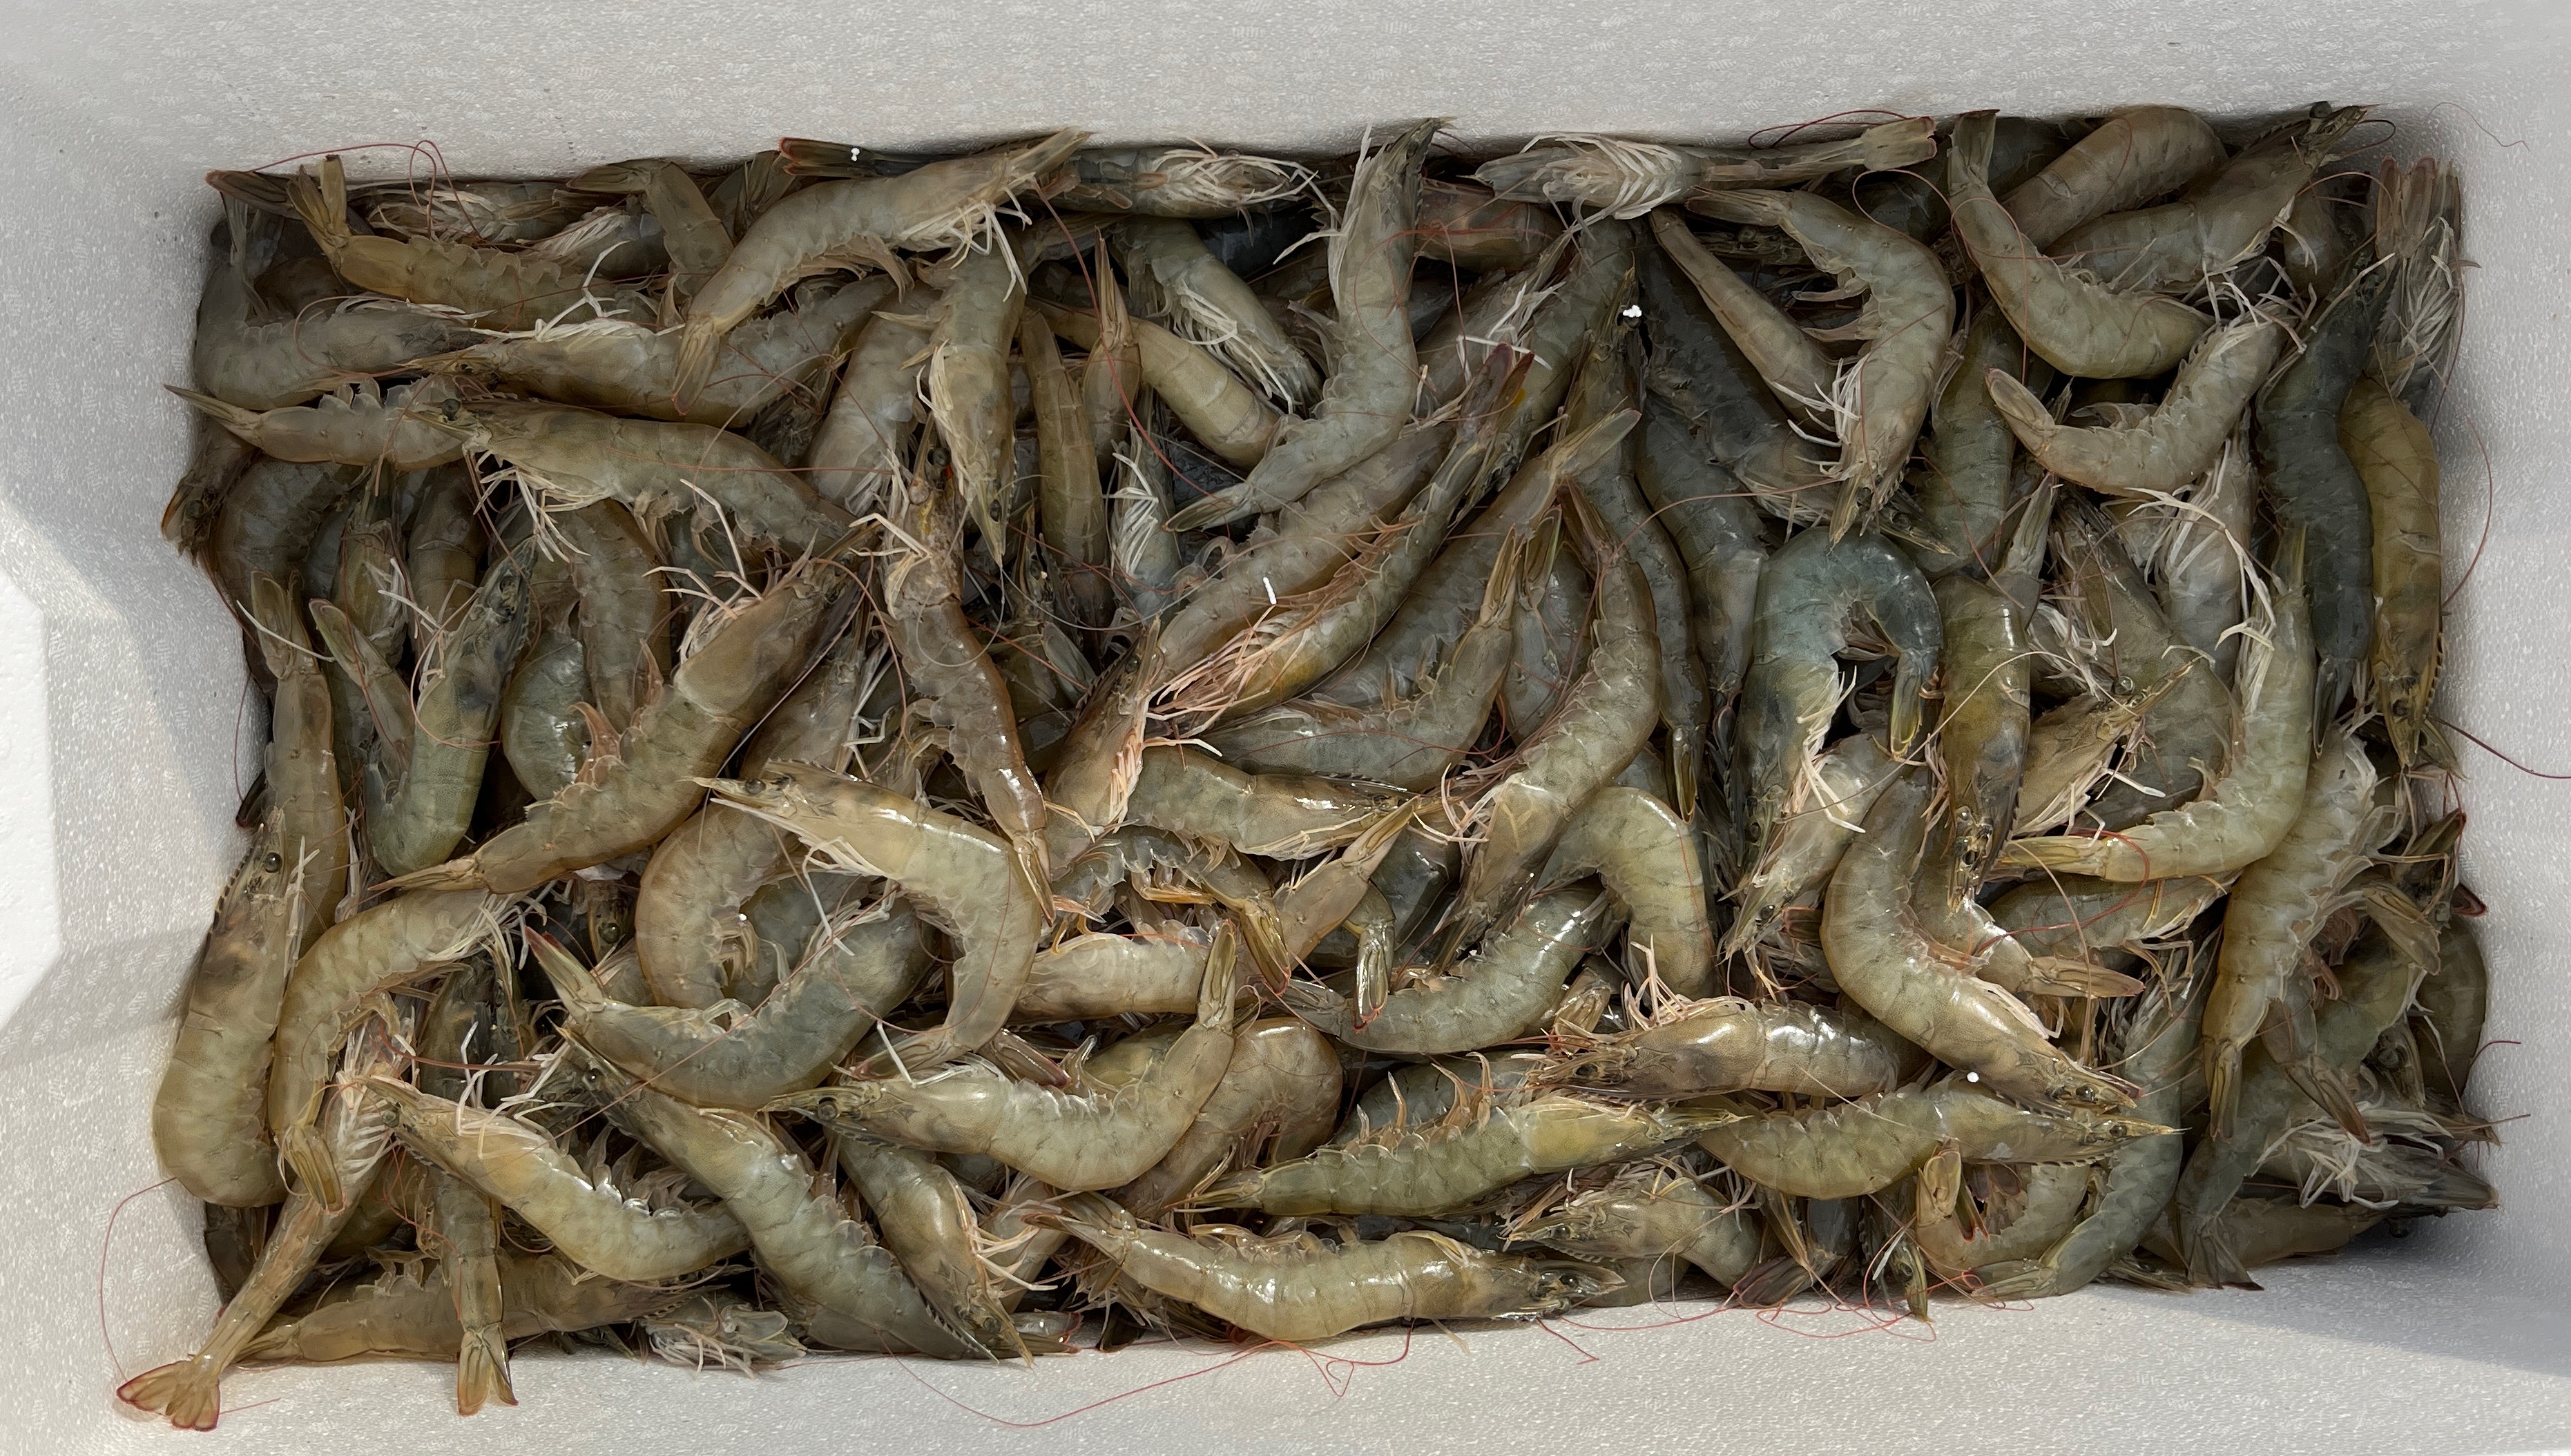 Innovative gas infusion technology boosts shrimp harvests